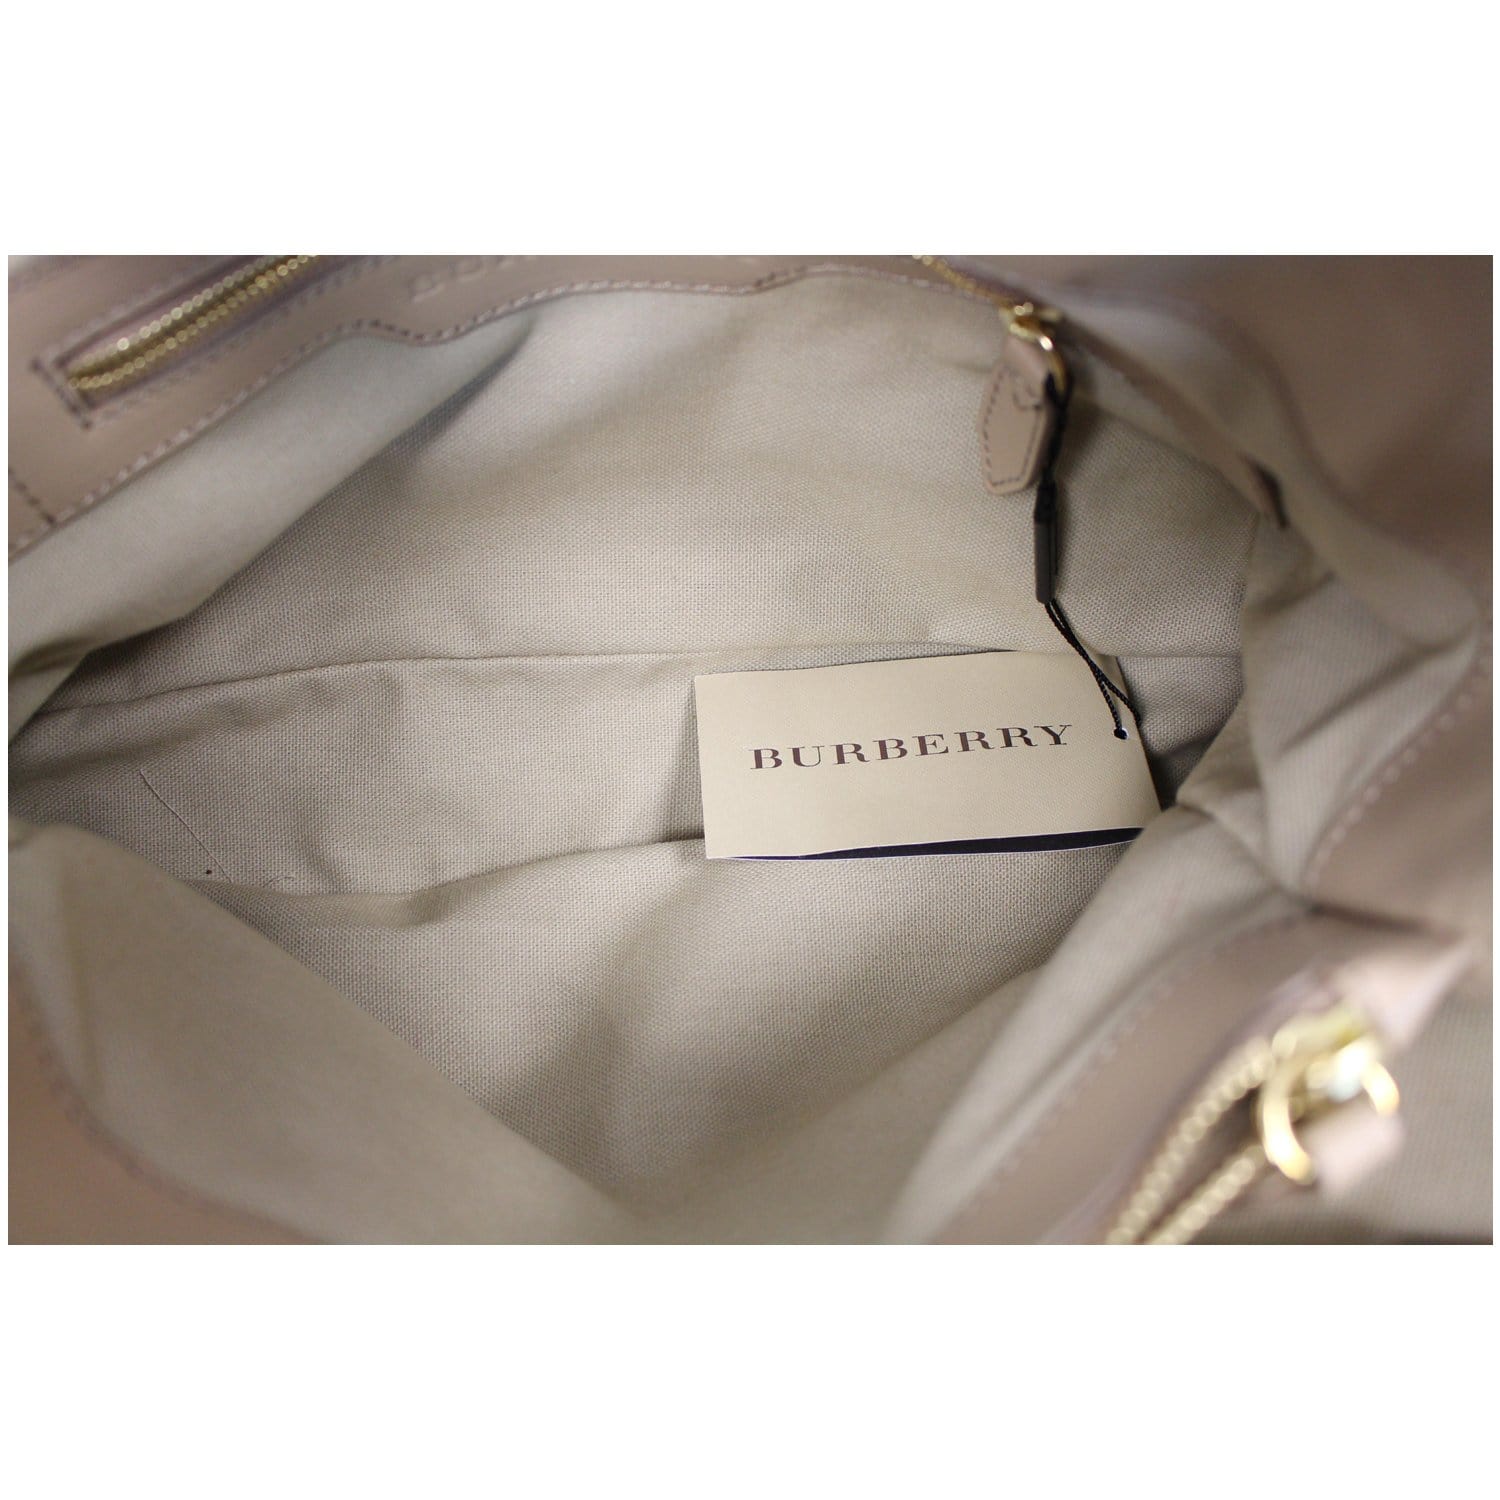 Burberry Bridle Small Soft Satchel Bag 4053684 Women's Leather